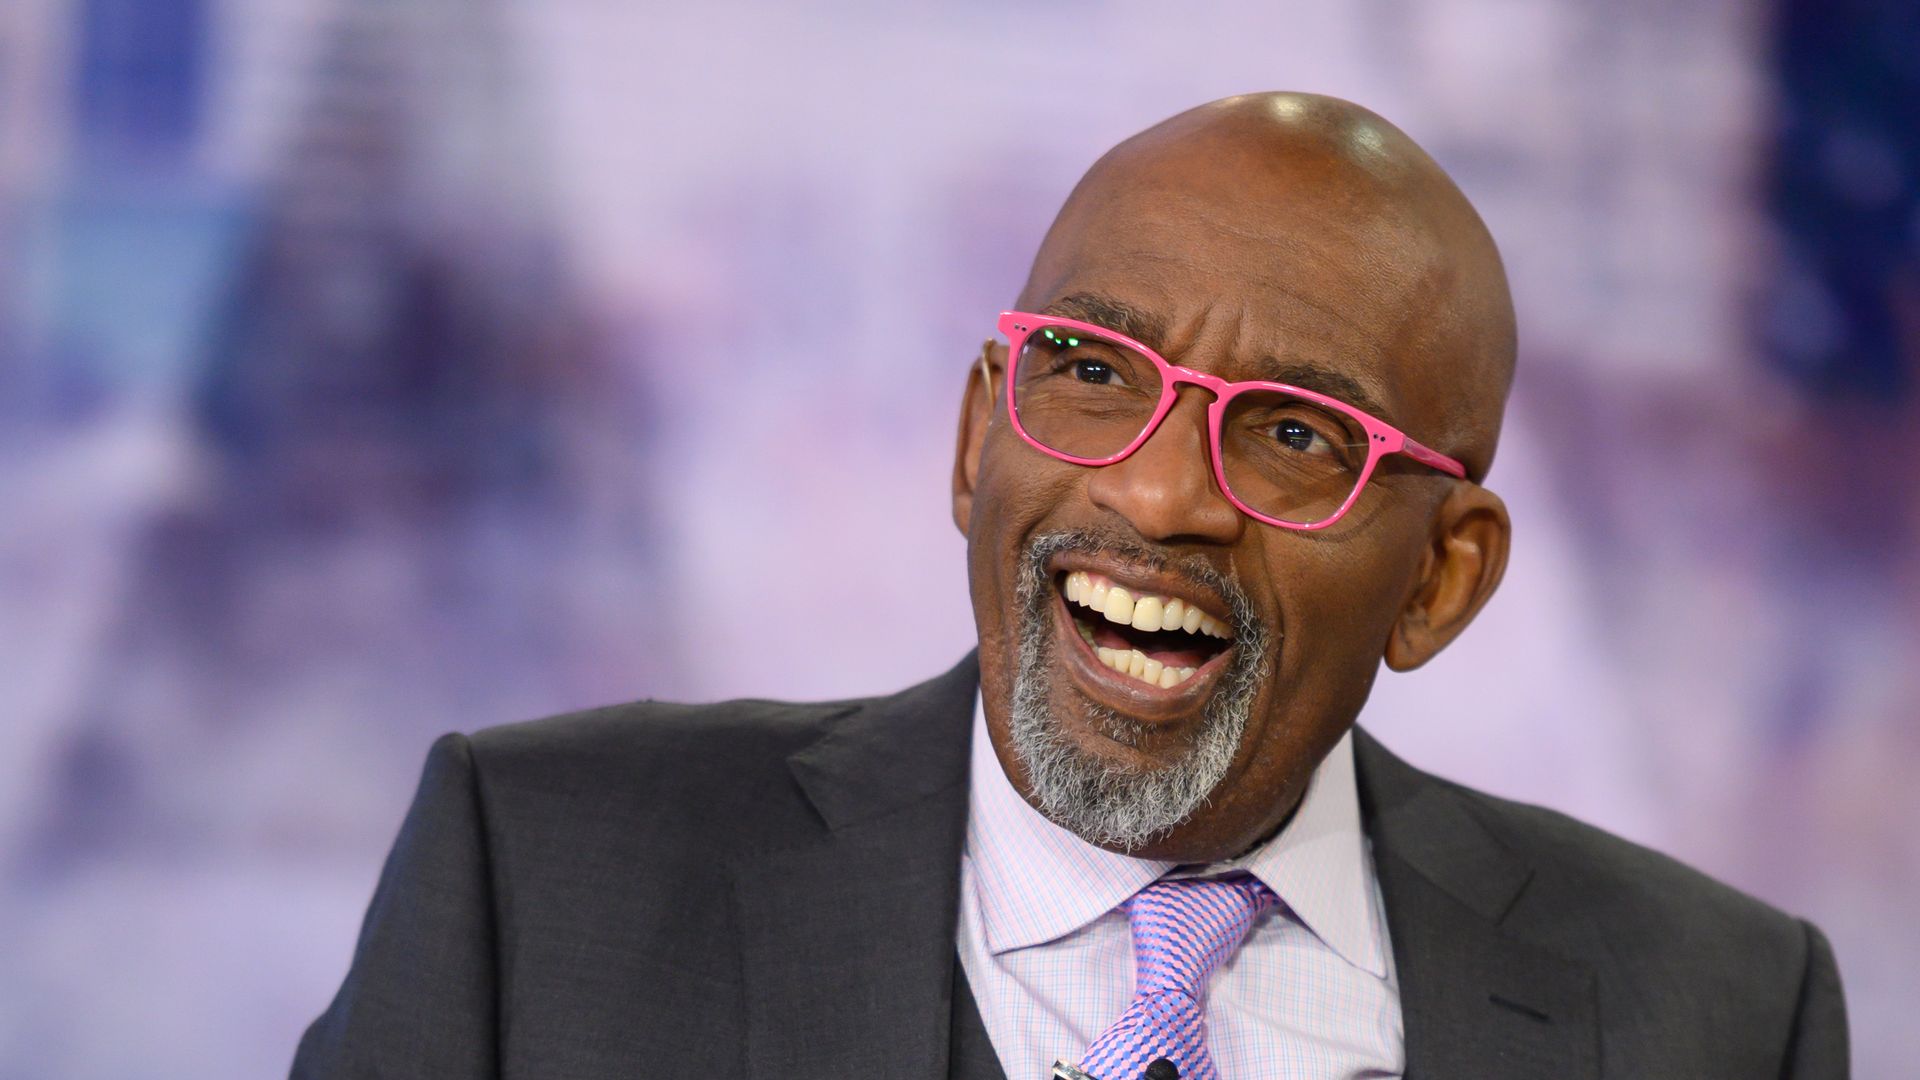 Al Roker over the moon as special guest joins him for momentous weather report on Today